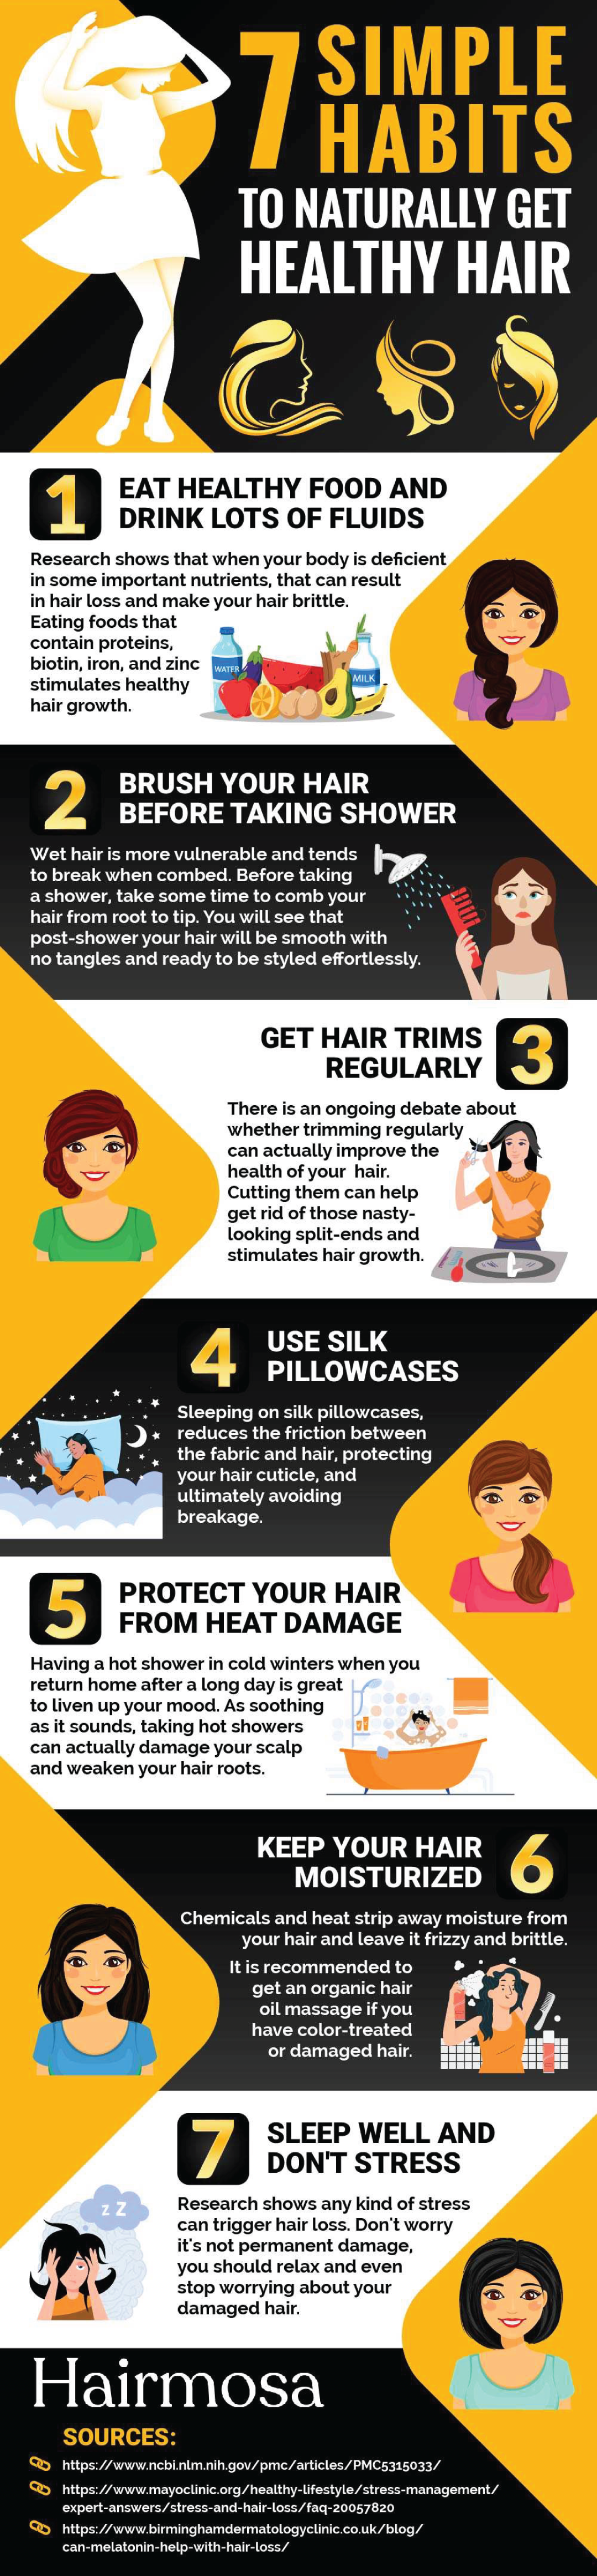 7 simple habits for healthier hair growth